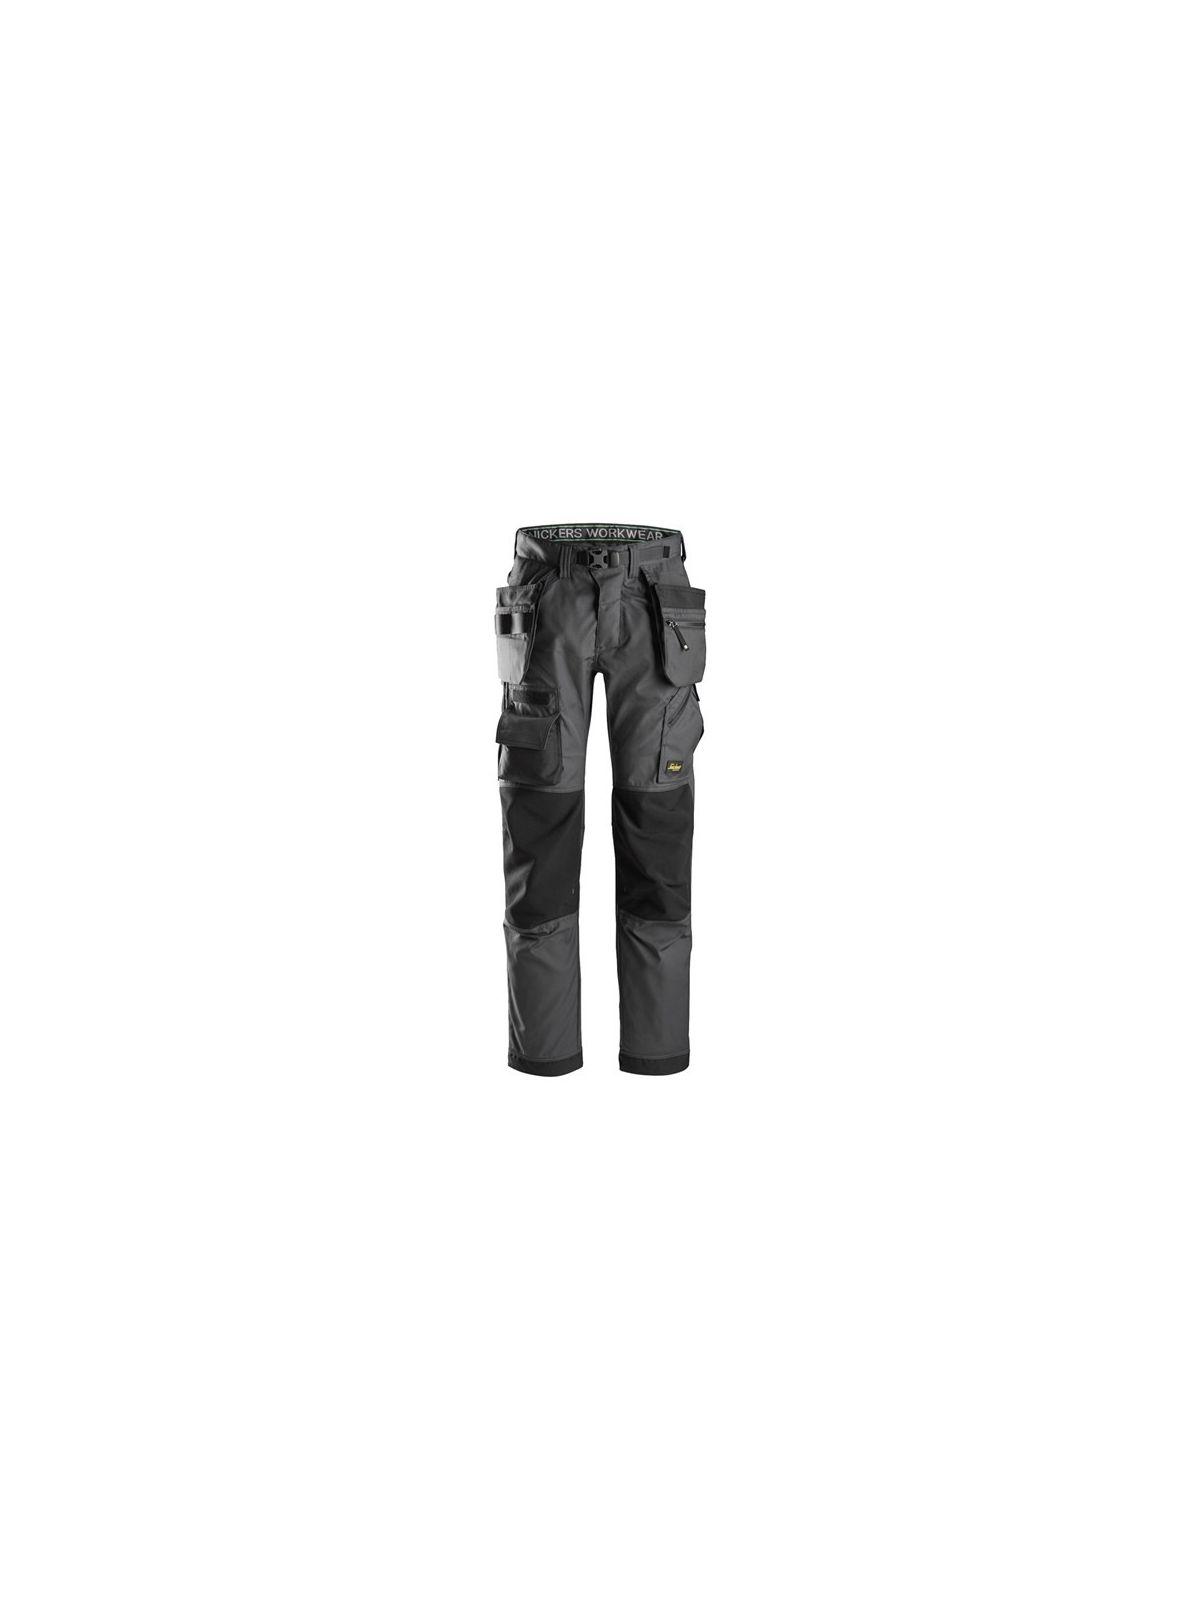 Floorlayers Trousers  Work Pants With Knee Protection  Buy Online at  Tuffshopcouk